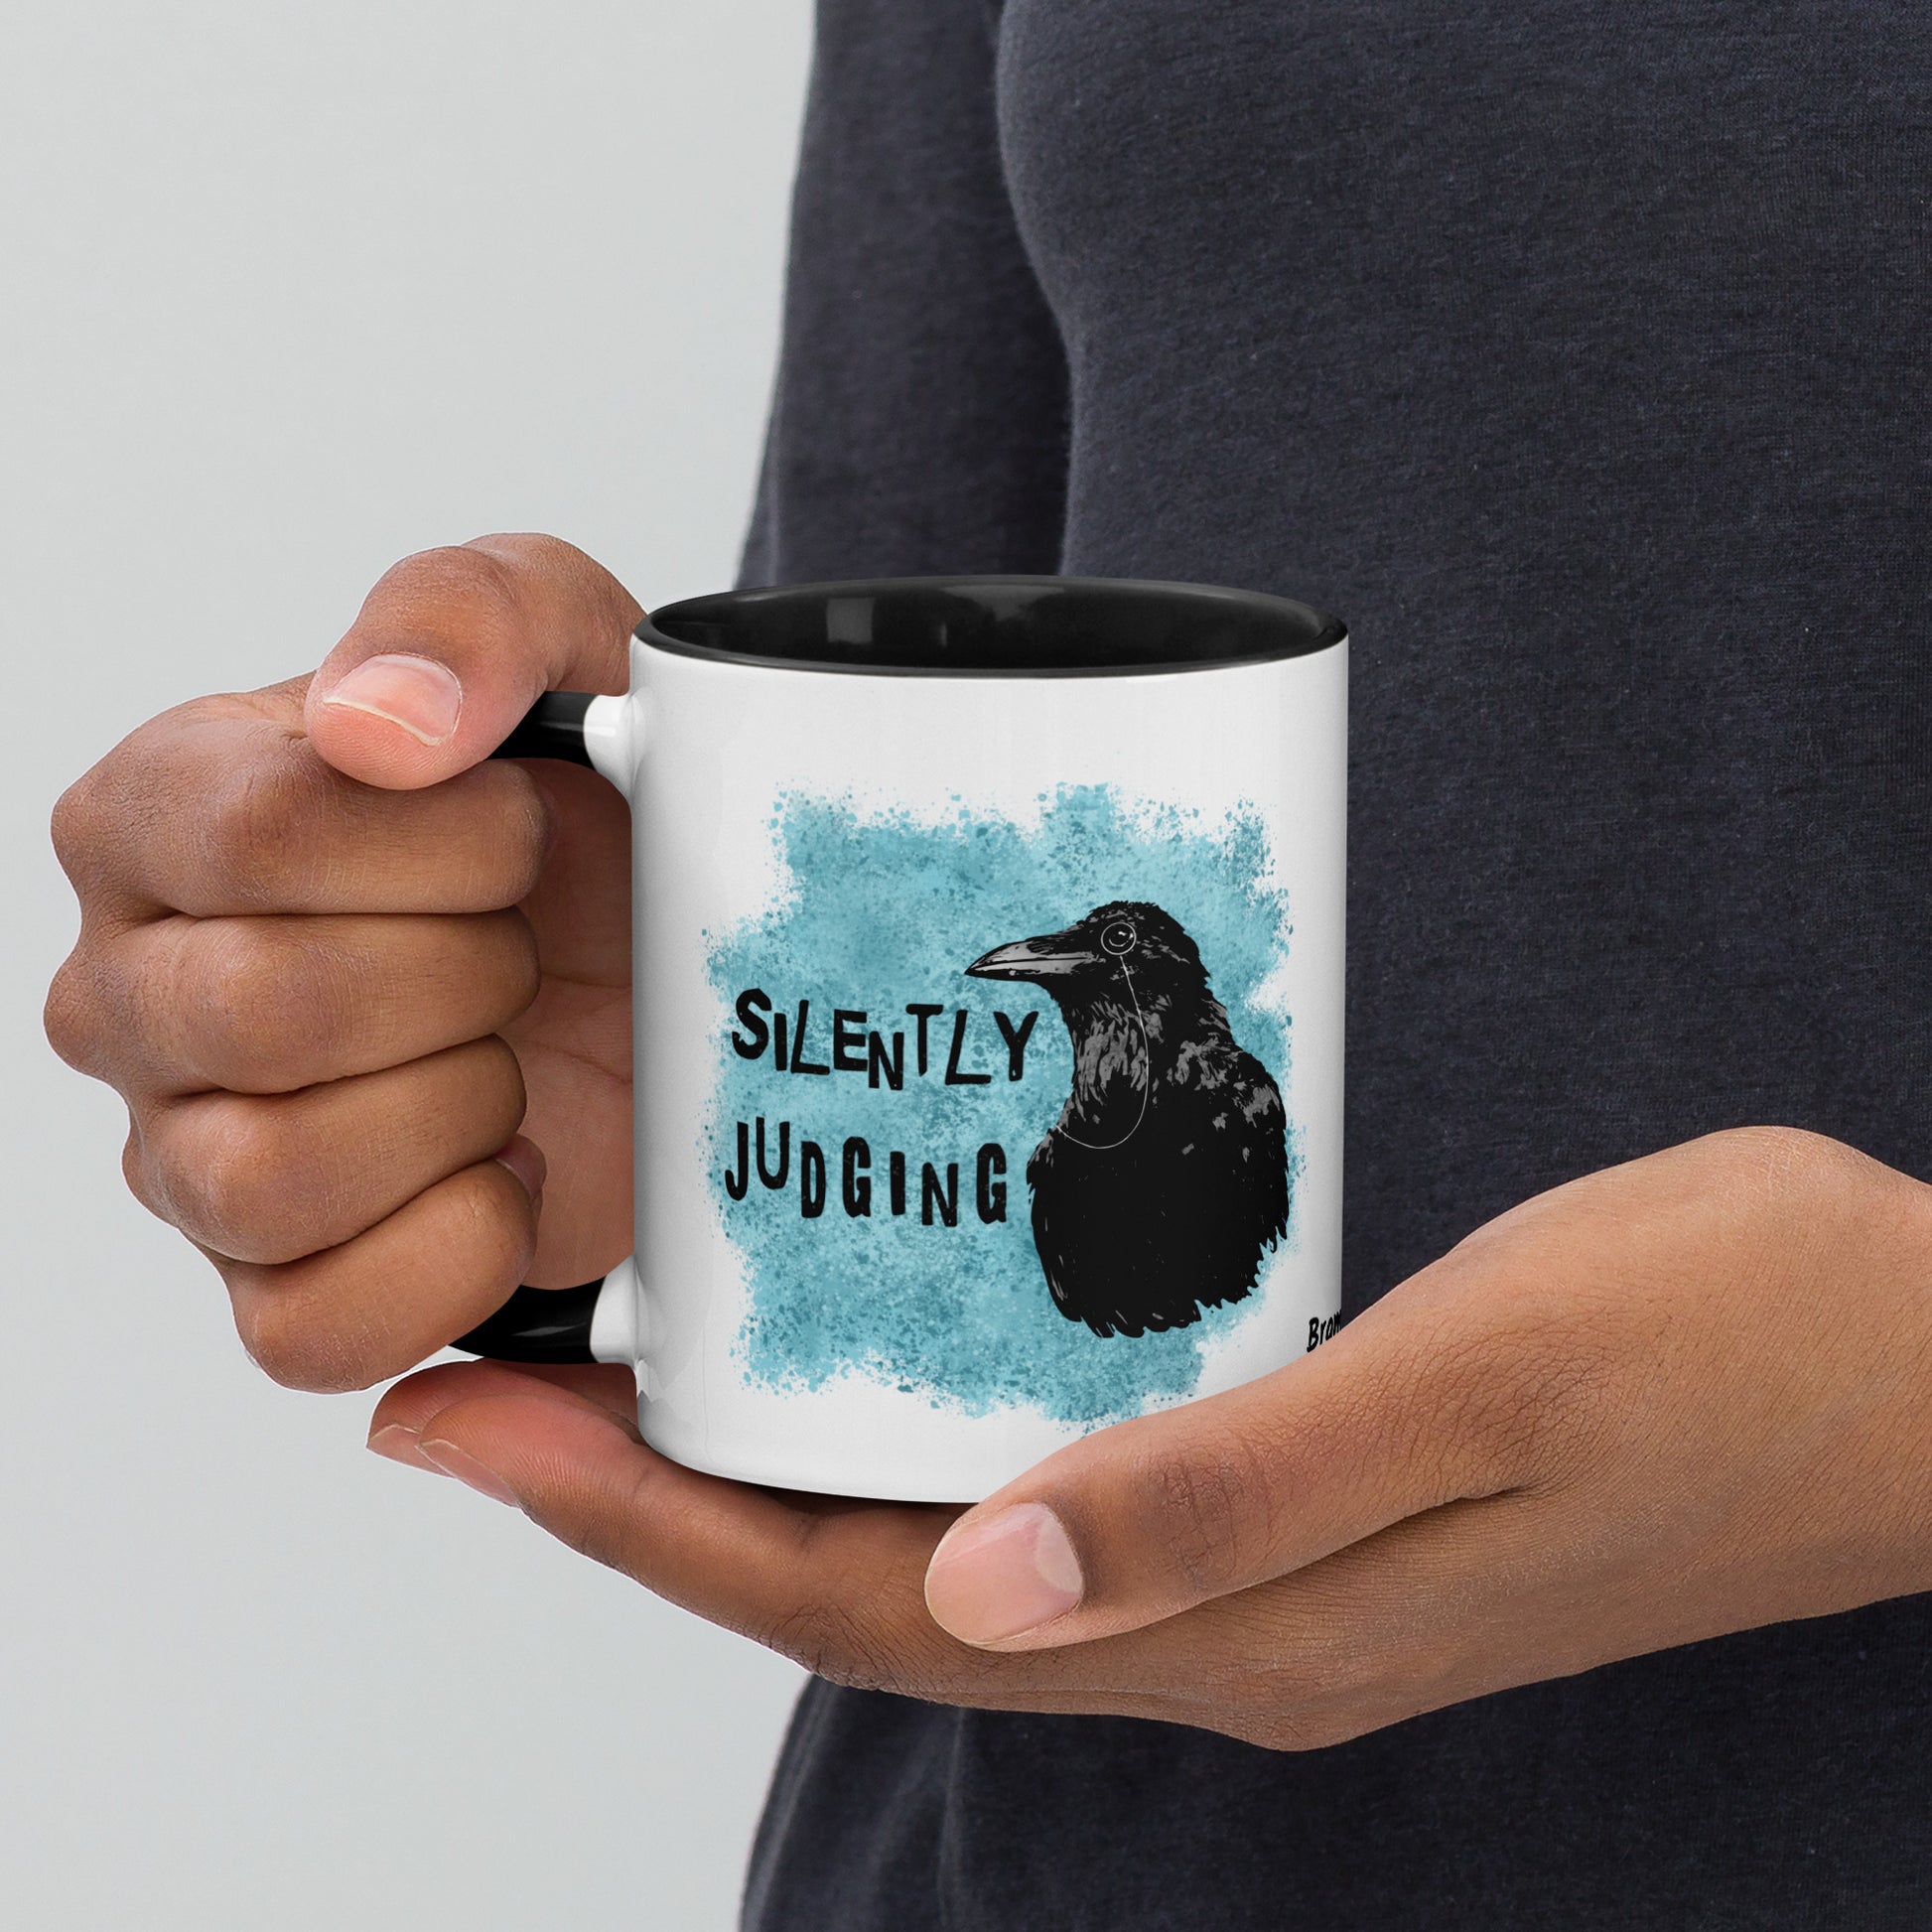 11 ounce ceramic mug with Silently Judging text next to a monacle-wearing crow on blue paint splatters. Double-sided design. Mug has black rim, handle, and inside. Shown in the hands of a model.